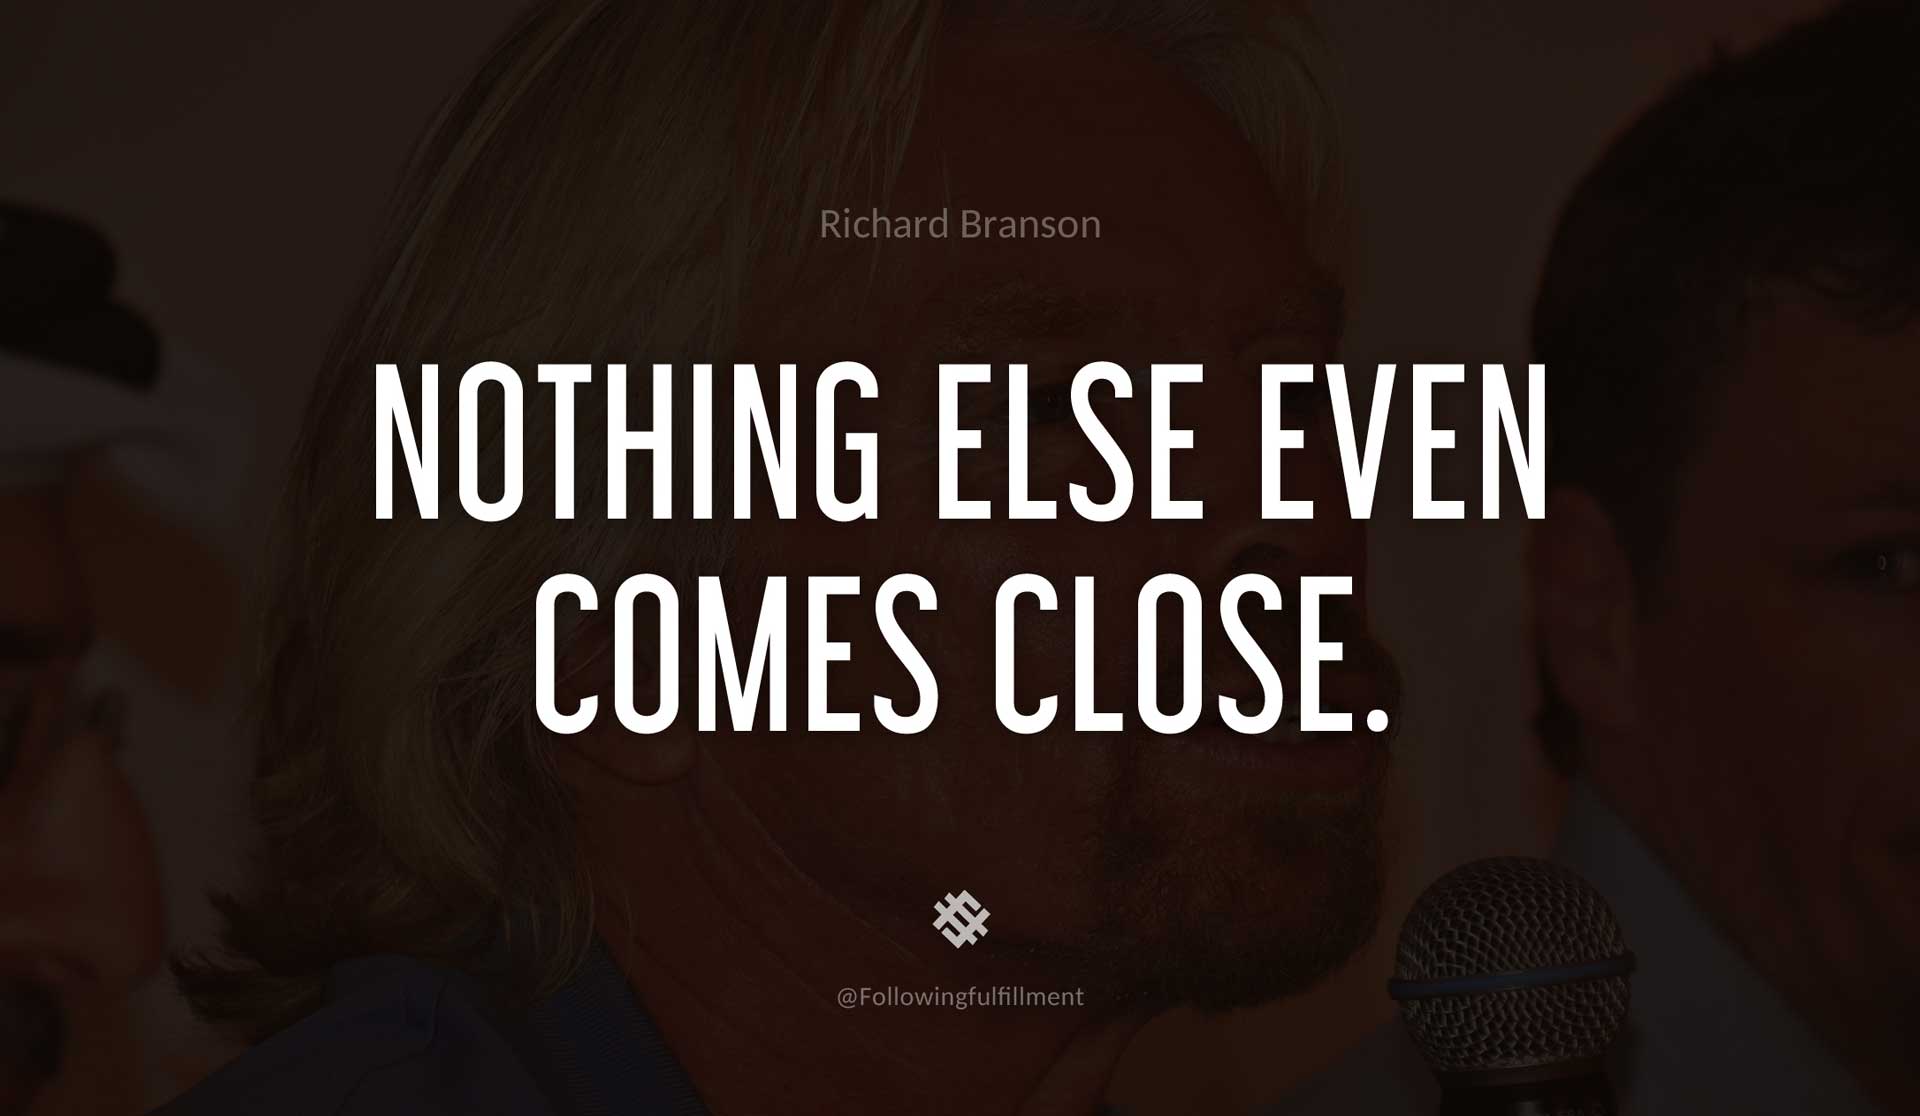 Nothing-else-even-comes-close.-RICHARD-BRANSON-Quote.jpg